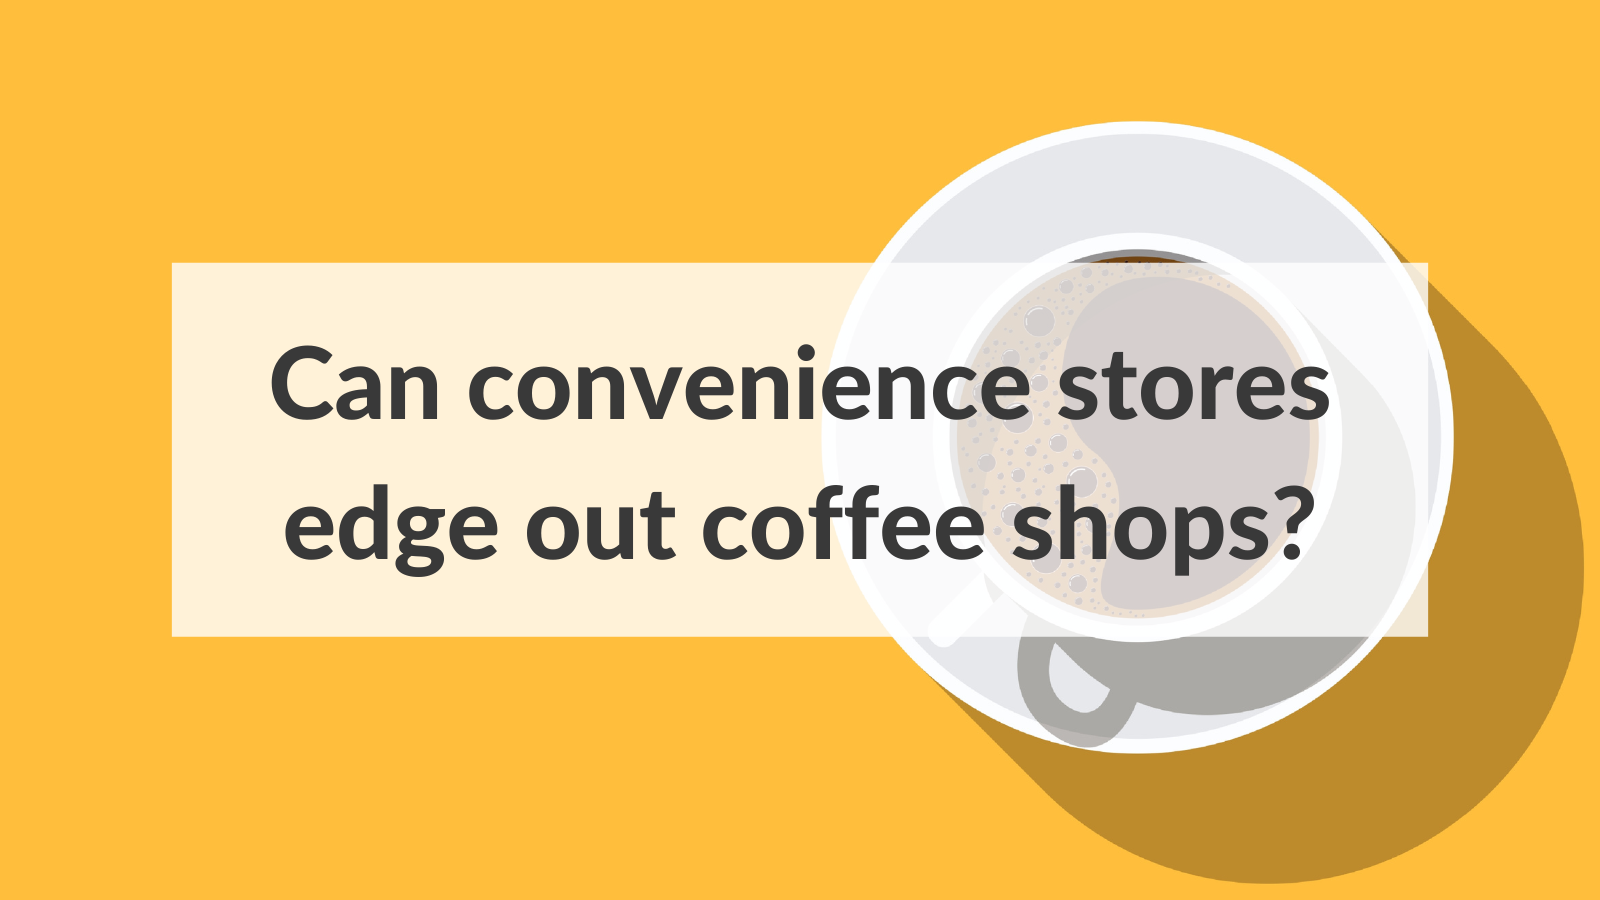 Coffee: A Hot Commodity for Convenience Stores